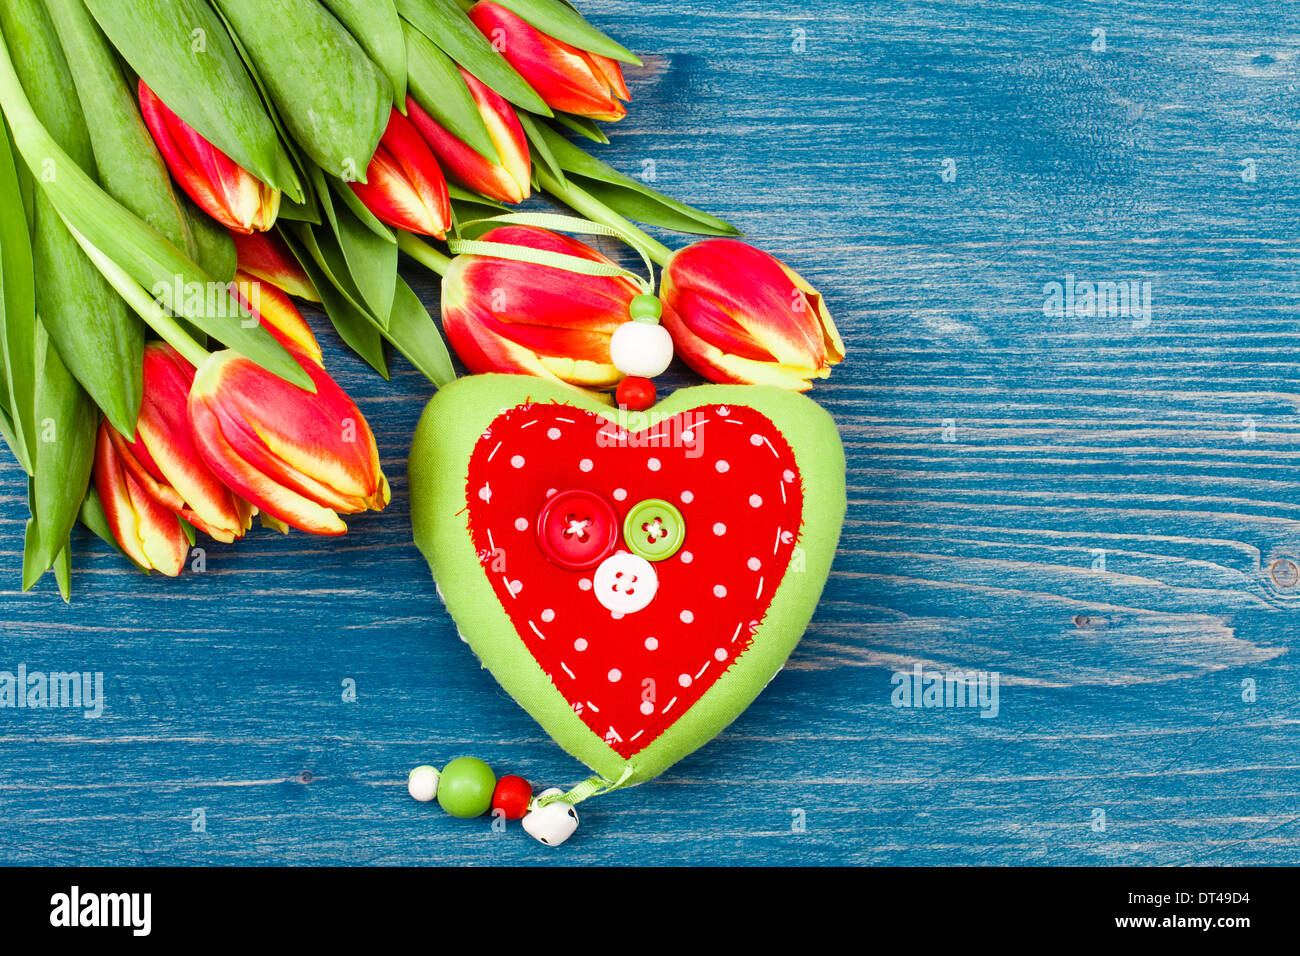 Tulip bouquet on a blue background, heart lining Stock Photo